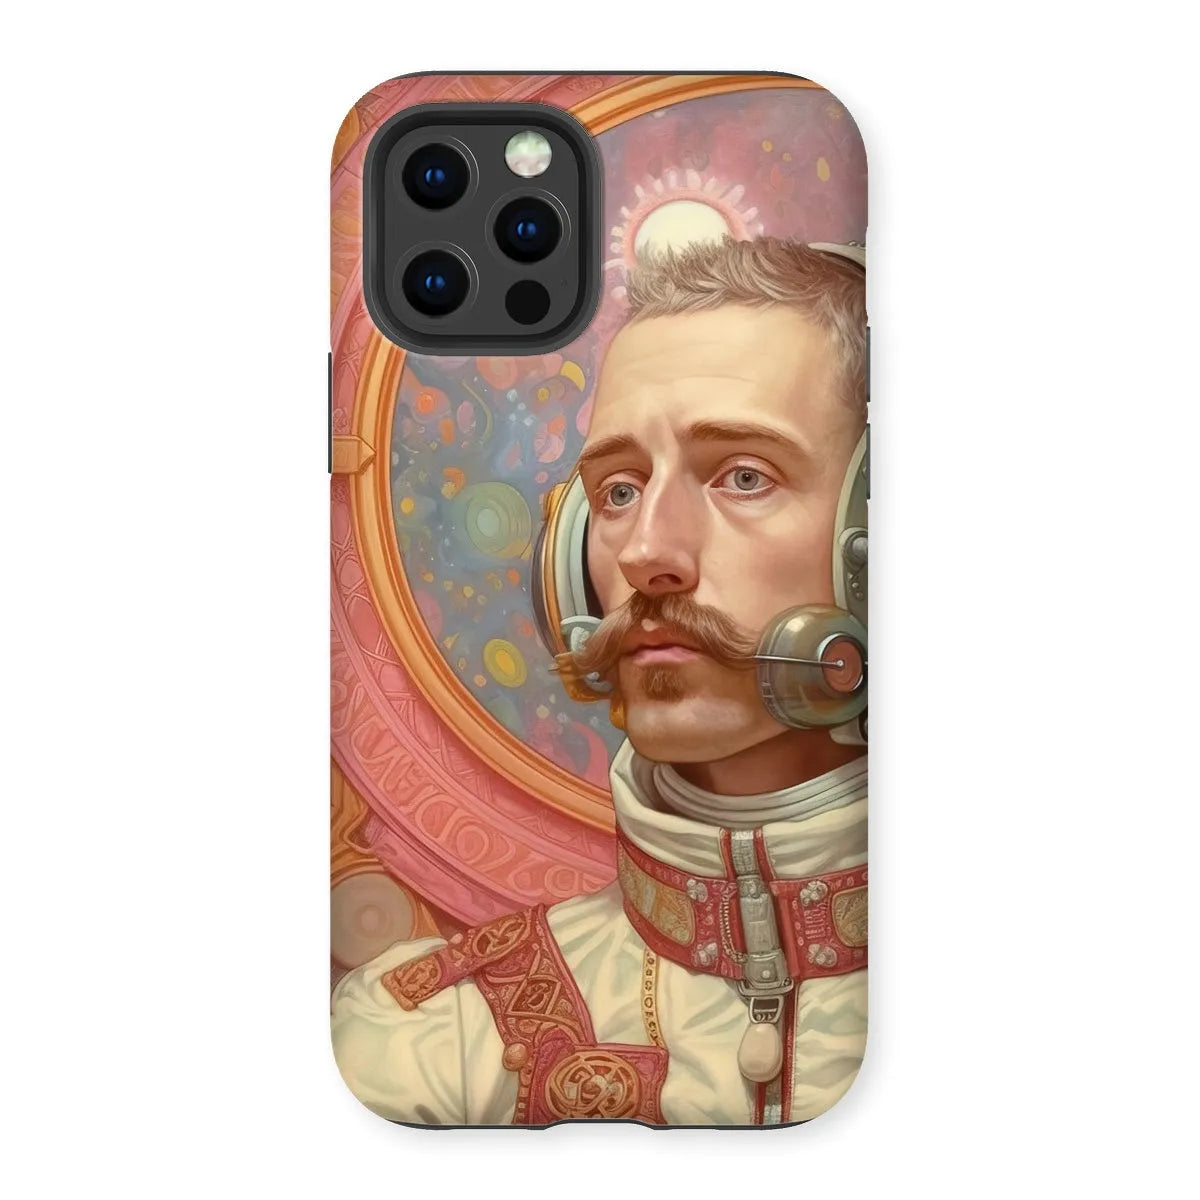 Axel The Gay Astronaut - Gay Aesthetic Art Phone Case - Iphone 12 Pro / Matte - Mobile Phone Cases - Aesthetic Art